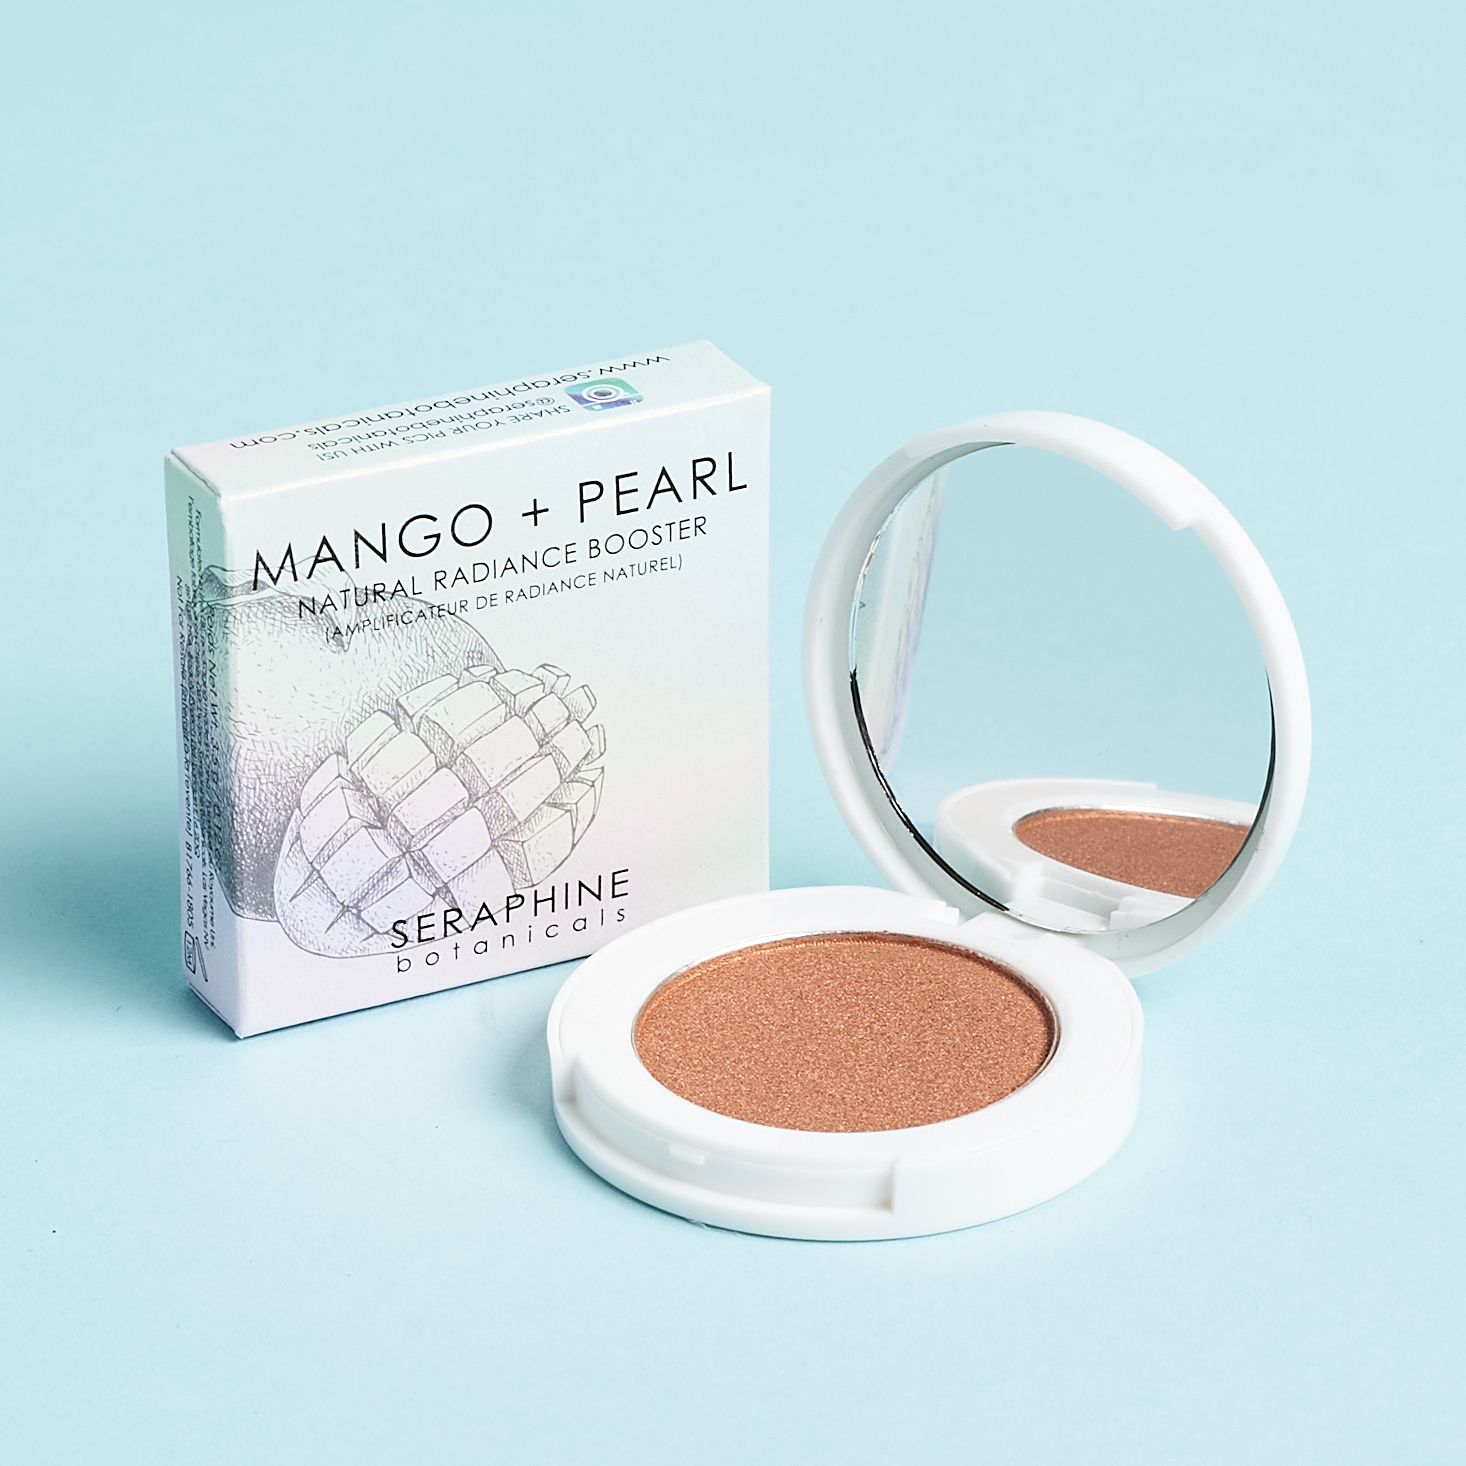 Seraphine Botanicals Mango + Pearl Natural Radiance Booster for Nourish Beauty Box July 2020